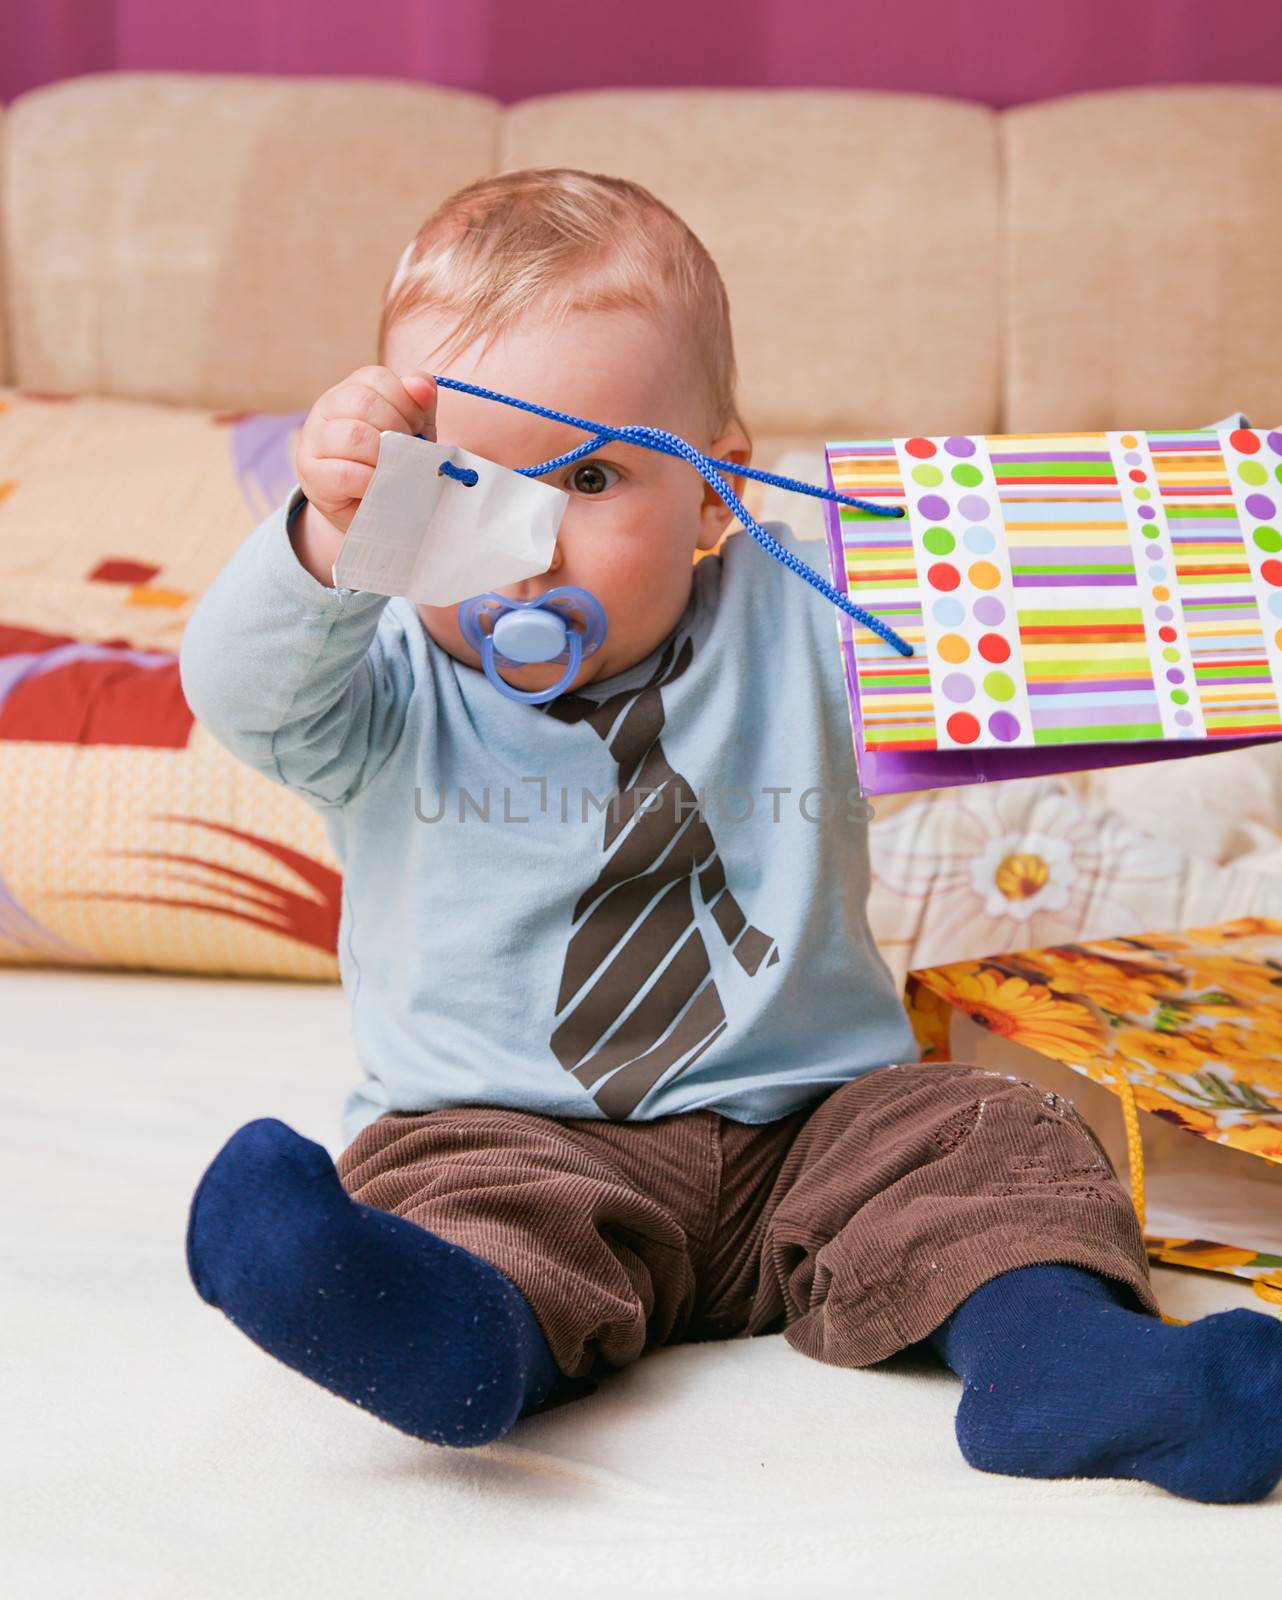 Young baby boy with a dummy in his mouth playing with colorful gift bags